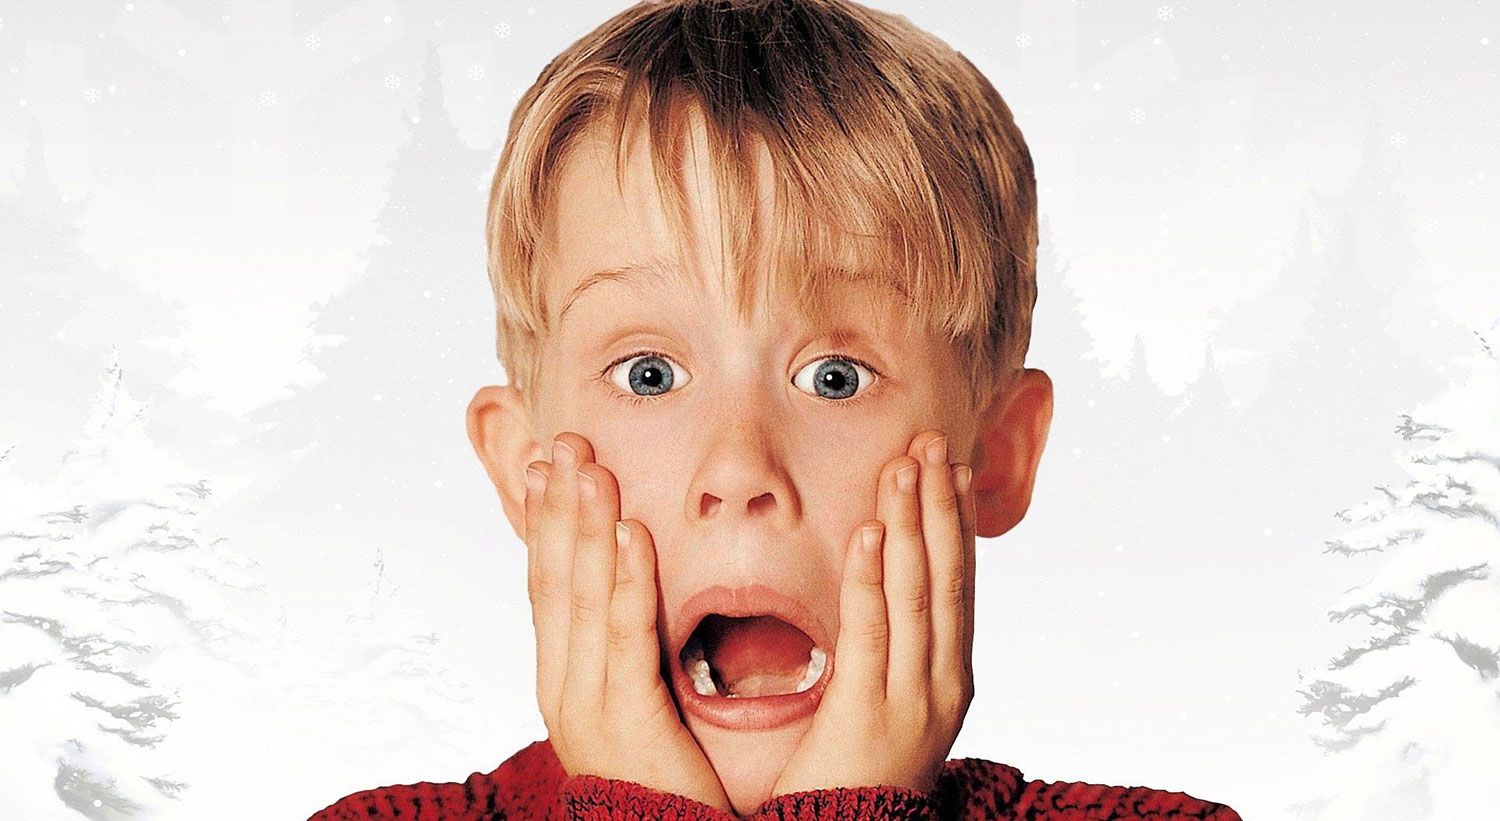 One Woman Watched Home Alone for the First Time and Her Review Is Hilarious